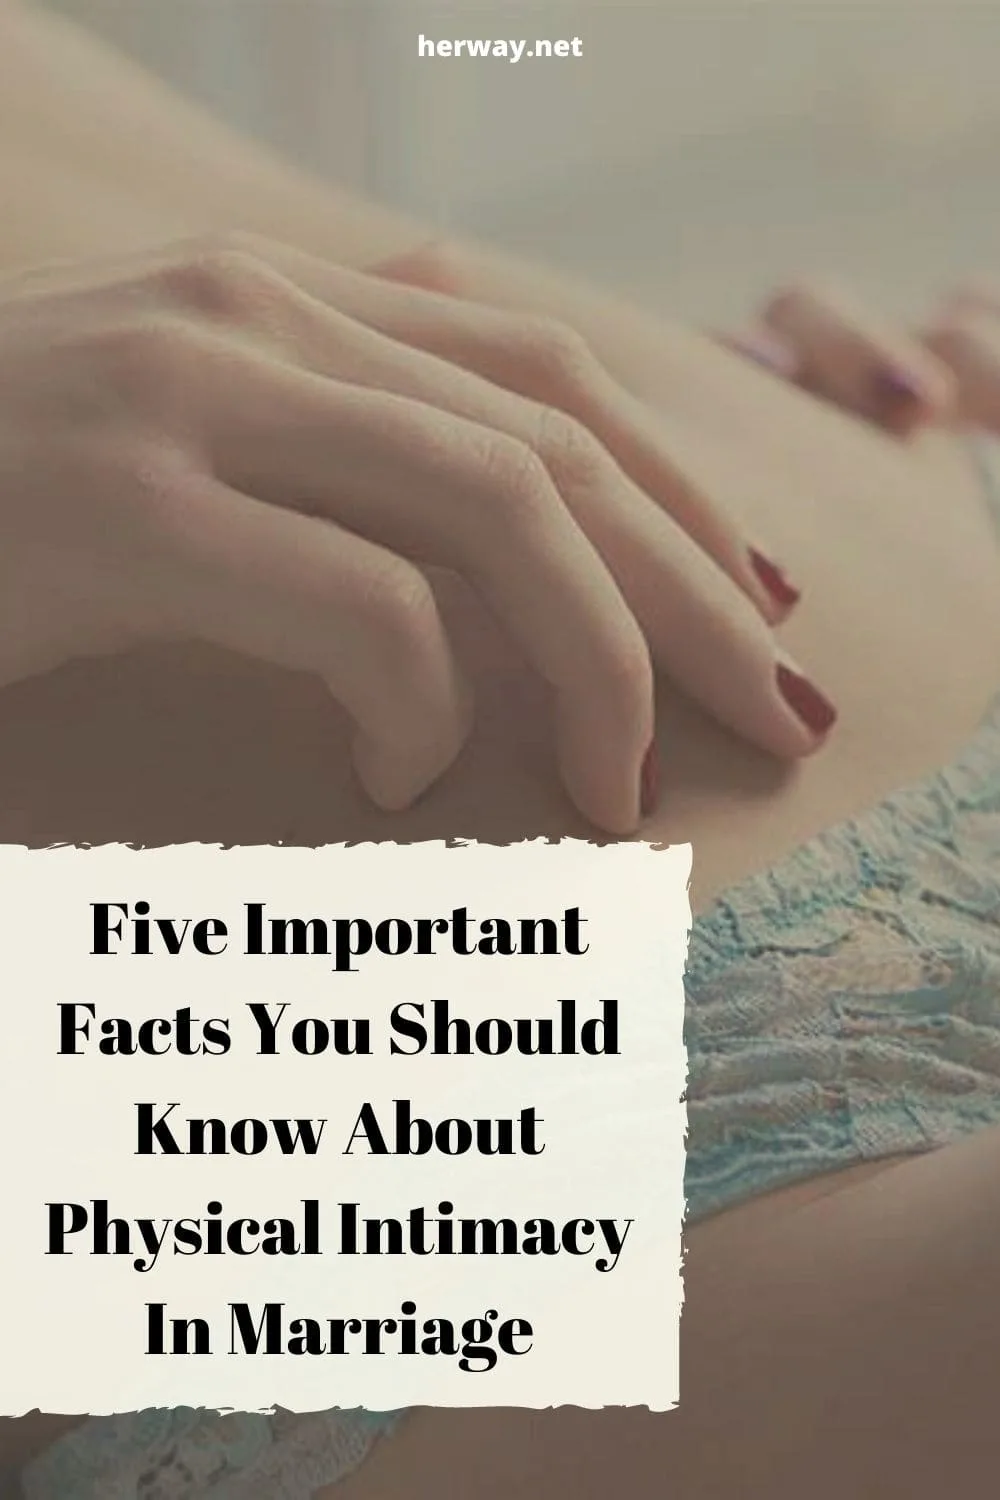 Five Important Facts You Should Know About Physical Intimacy In Marriage